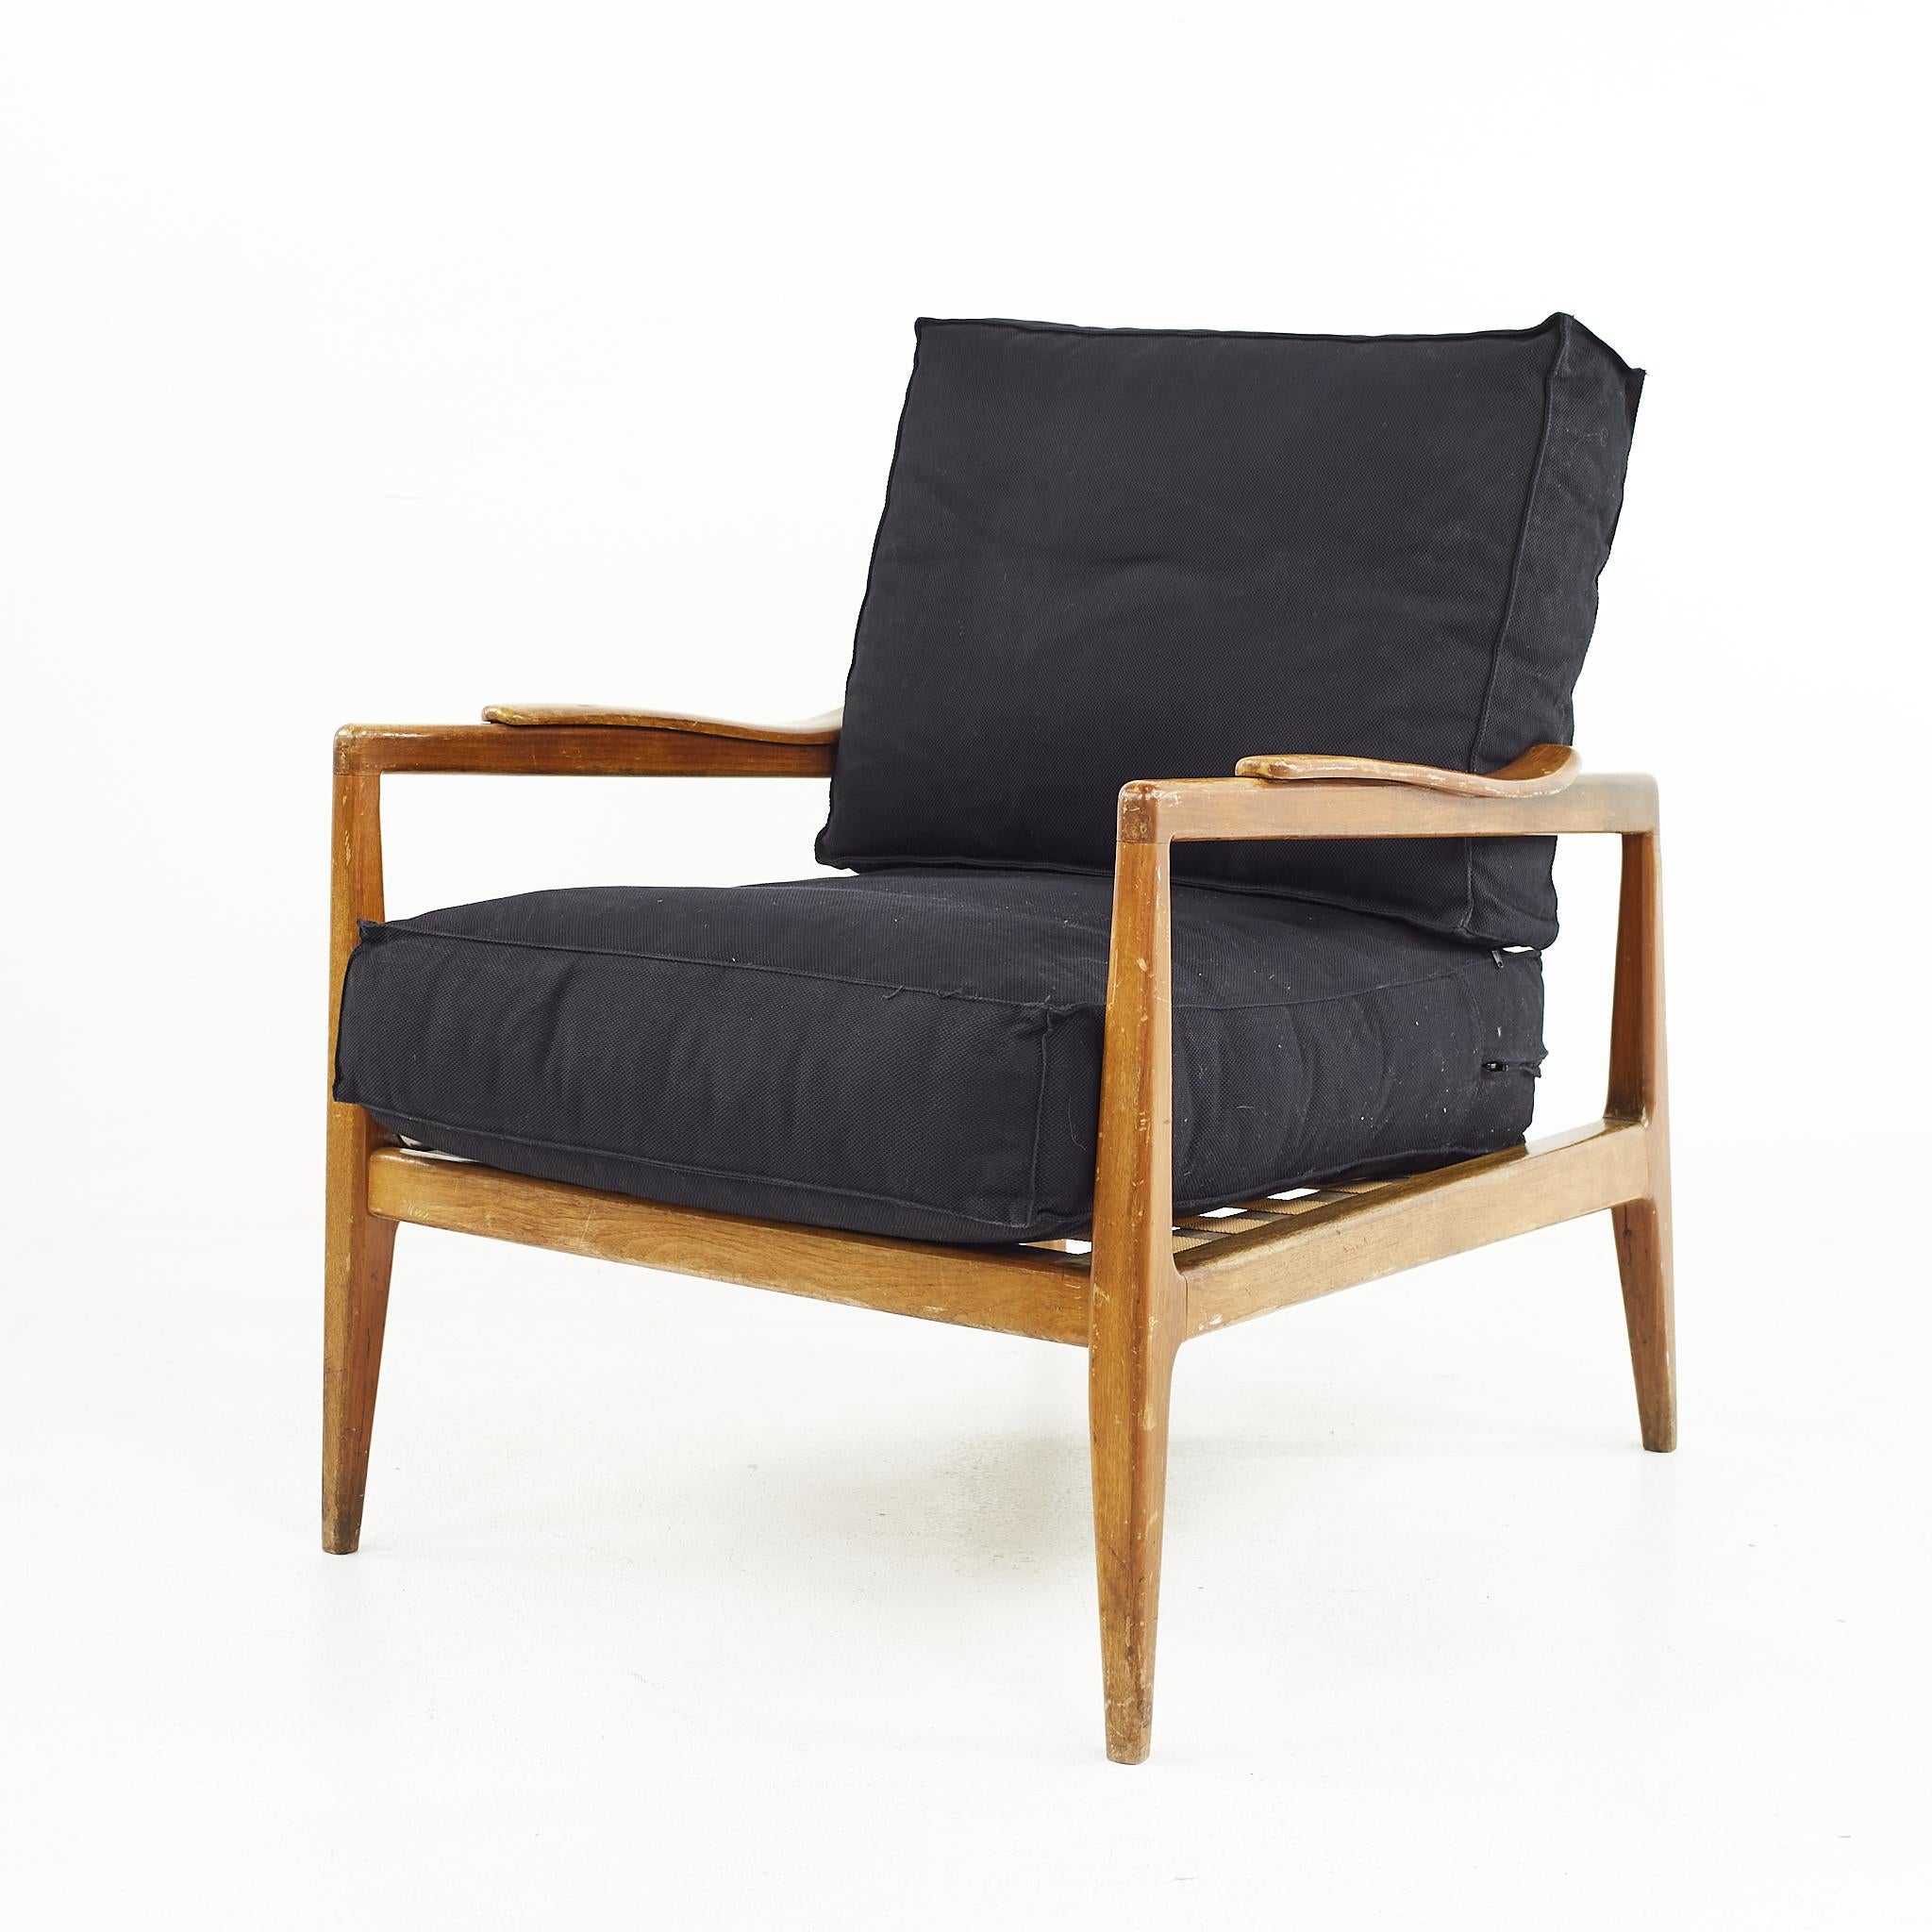 Mid-Century Modern Edmond Spence Urban Aire Mid Century Walnut Lounge Chair with Black Upholstery For Sale